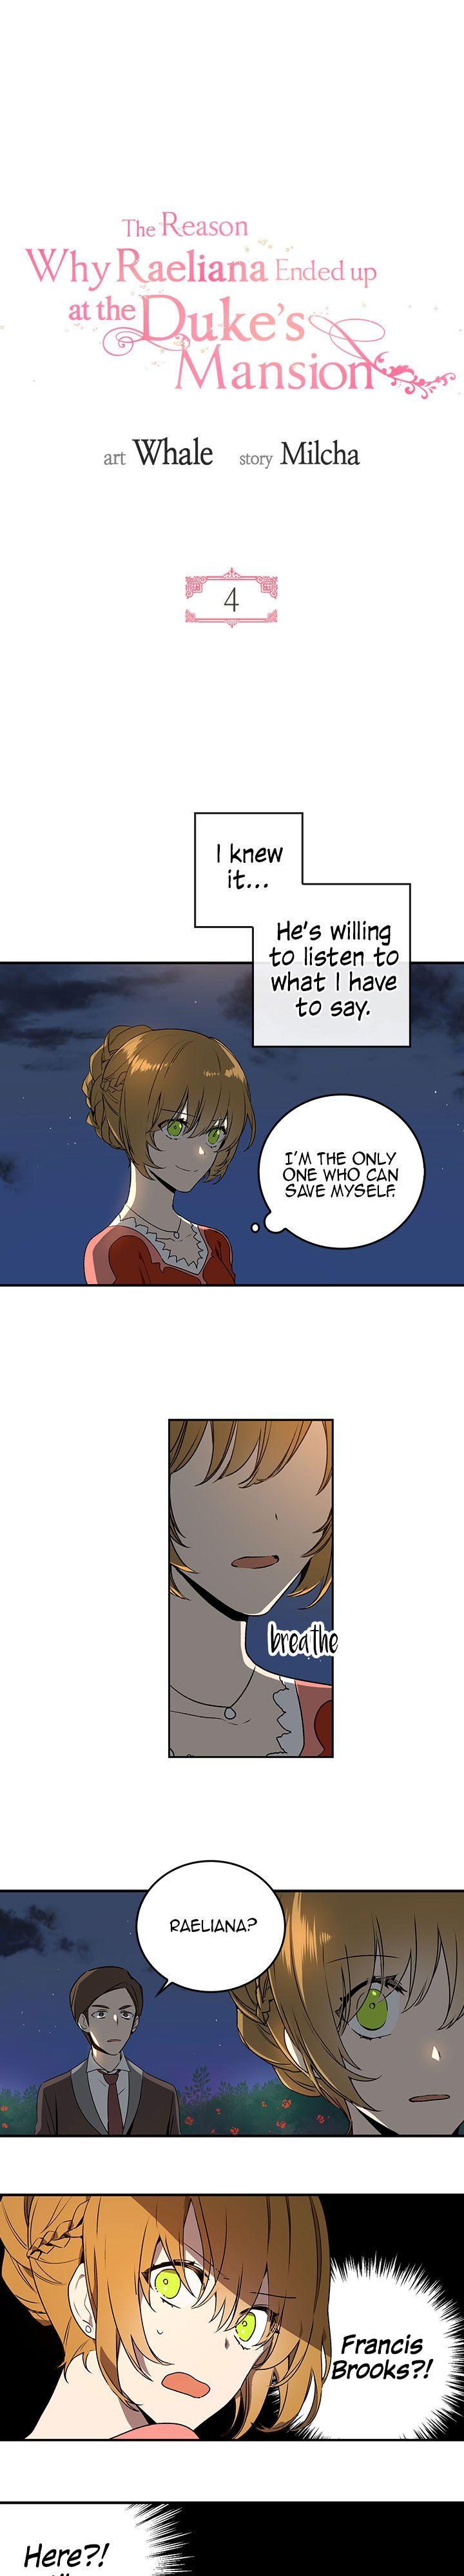 The Reason Why Raeliana Ended up at the Duke’s Mansion Chapter 4 - Page 2